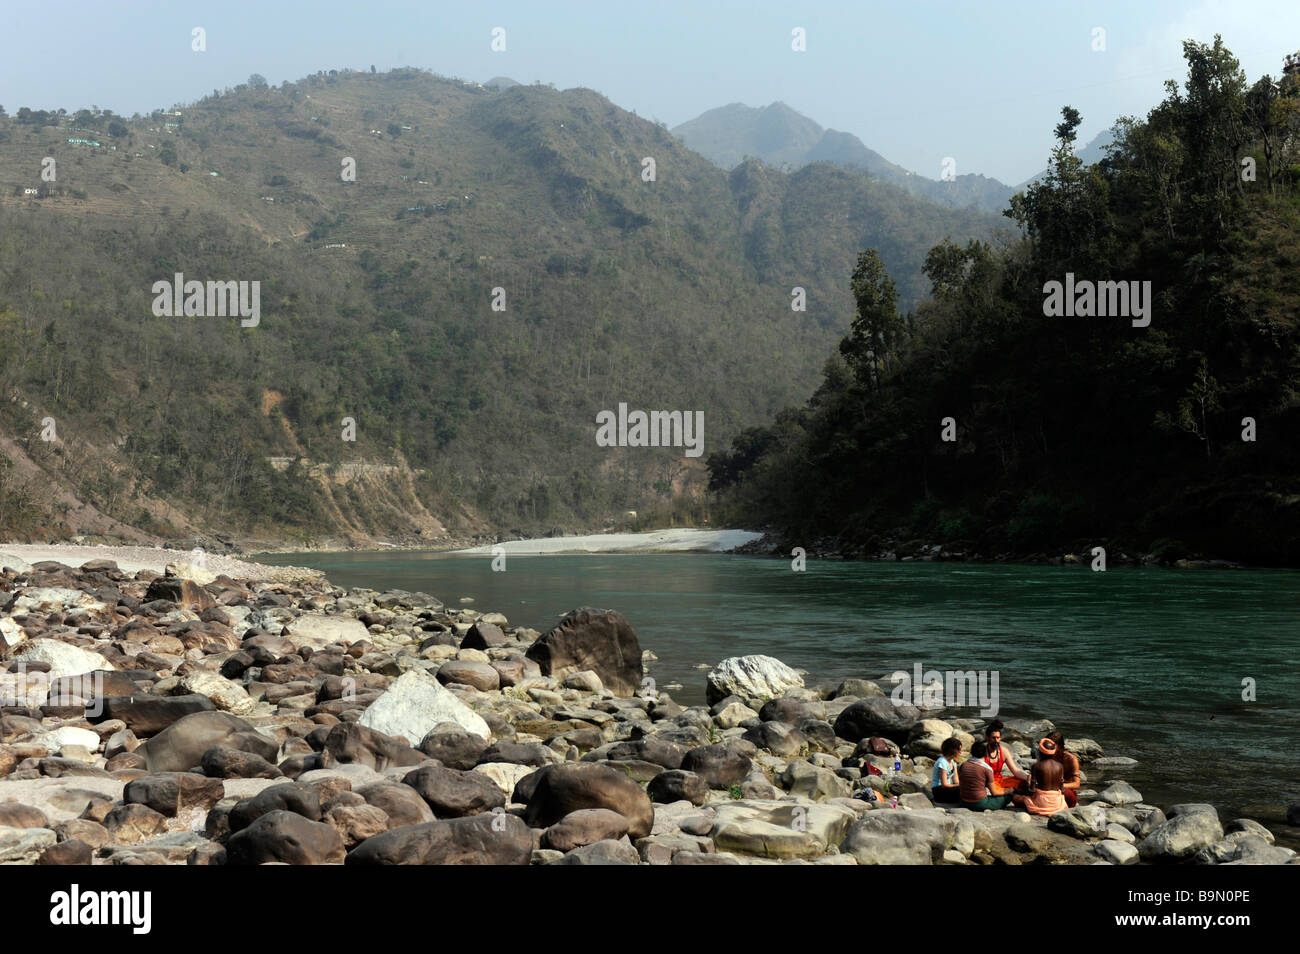 A group of people taking part in a meditation by the Ganges Shivpuri Uttaranchal, North India Stock Photo